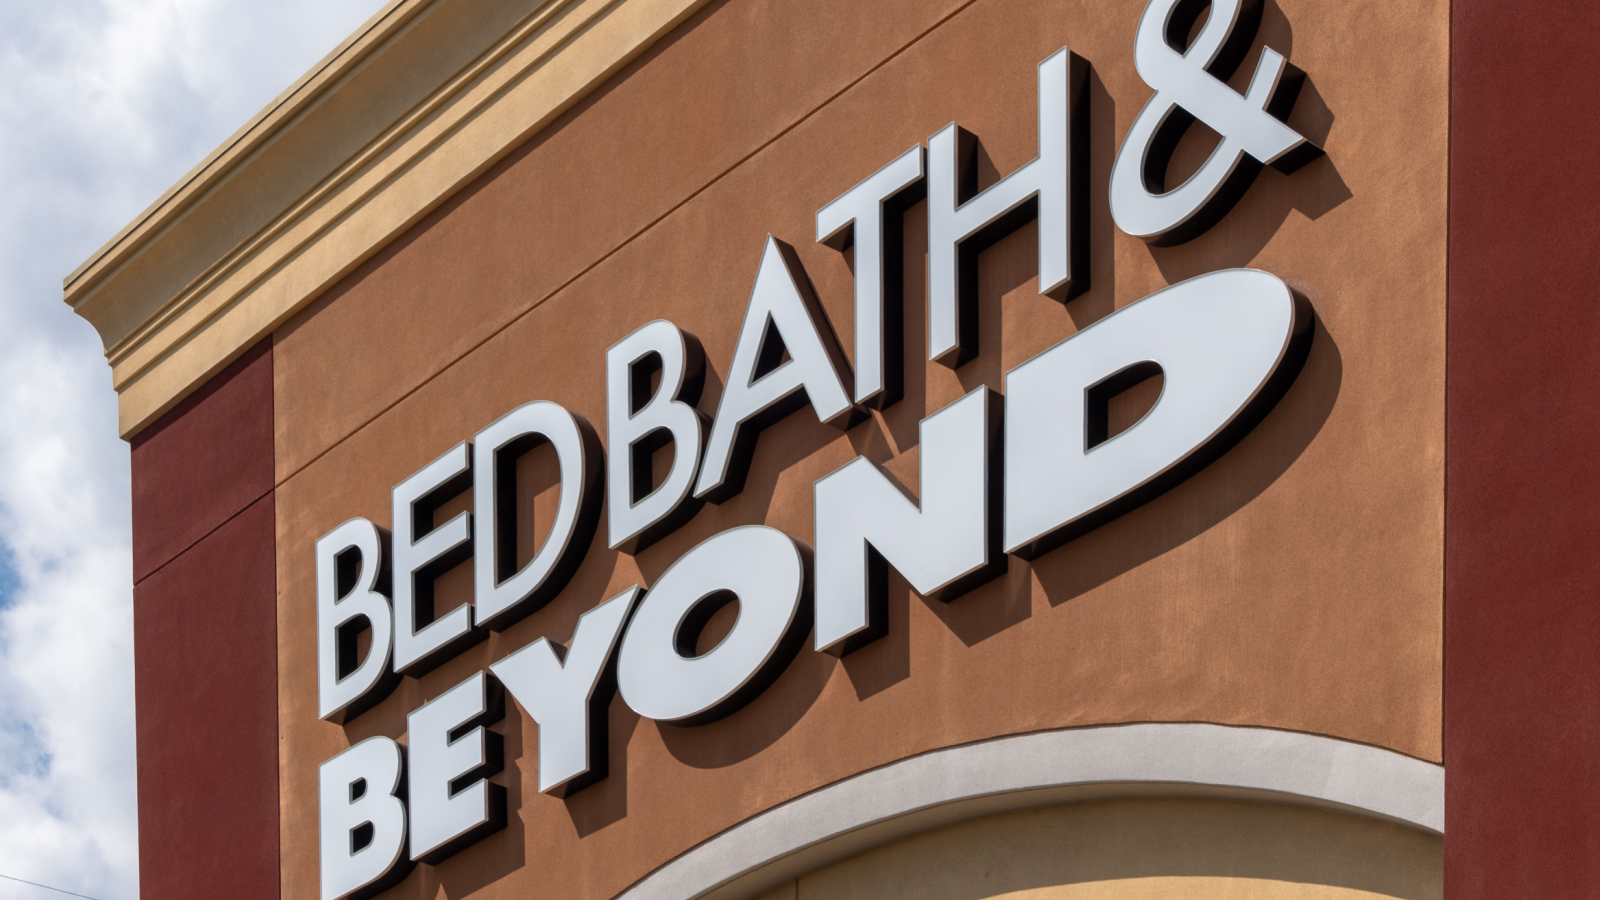 Bed Bath and Beyond Inc. (BBBY) is an American chain of domestic merchandise retail stores founded in 1971. The chain is counted among the Fortune 500.